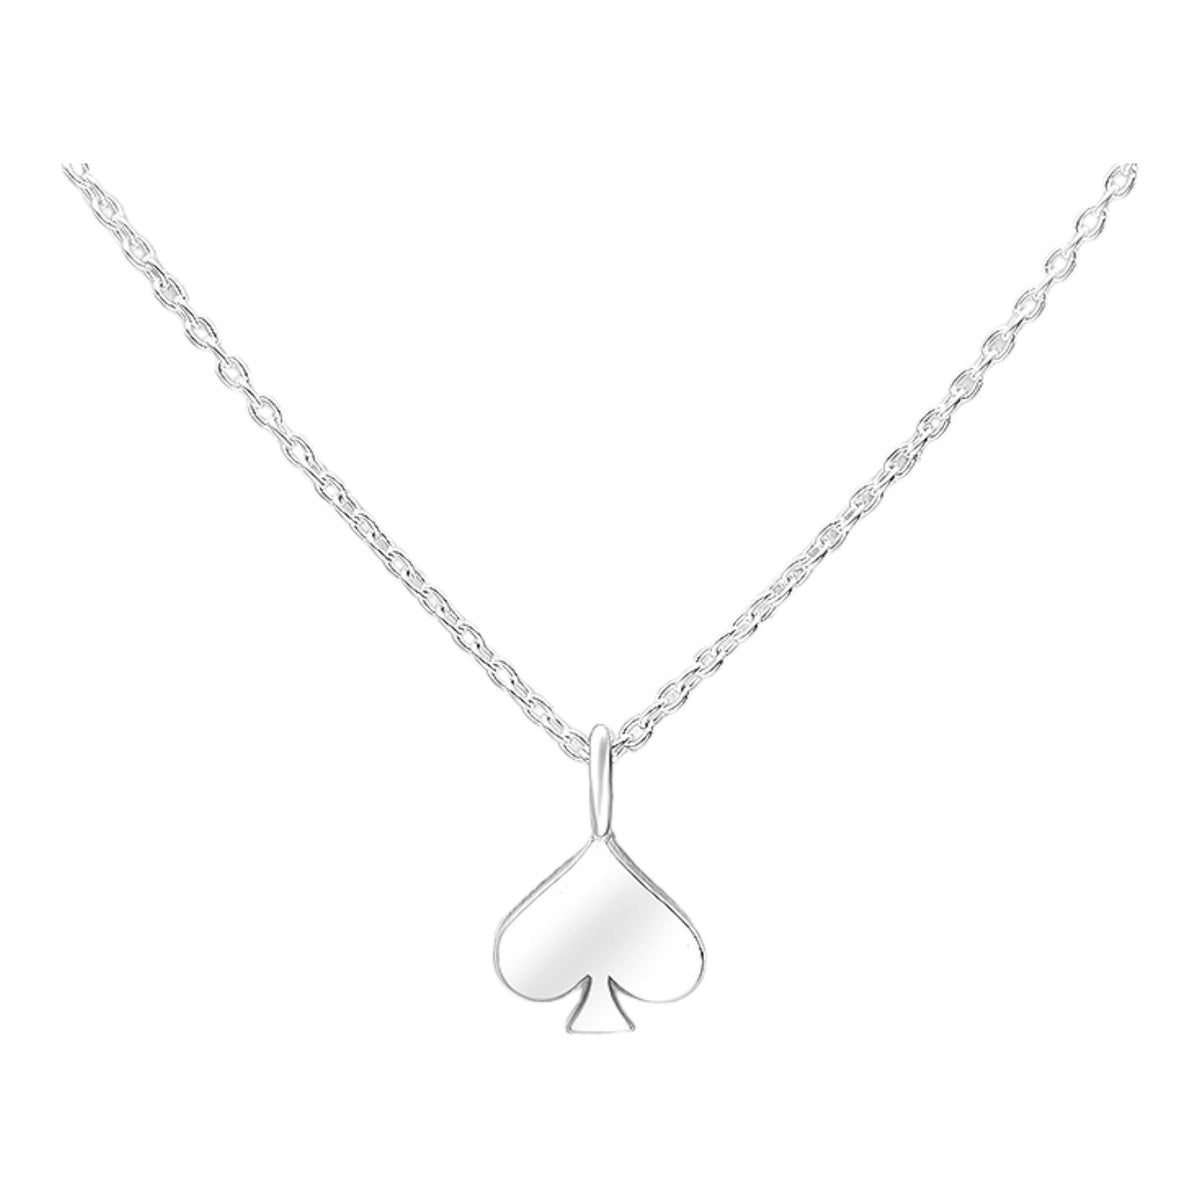 spades necklace in silver dainty, womens fine jewelry, poker necklaces for women, white gold poker spades necklaces, minimalist jewelry, gambling enthusiast gift ideas, luxury jewelry, nice jewelry, new womens fashion, new jewelry 2024, trending jewelry 2024, trending jewelry 2025, nice necklaces, plain silver necklaces, real jewelry, jewelry websites, fashion gift ideas, affordable fine jewelry, designer fine jewelry, kesley jewelry, jewelry brands, real sterling silver necklaces 